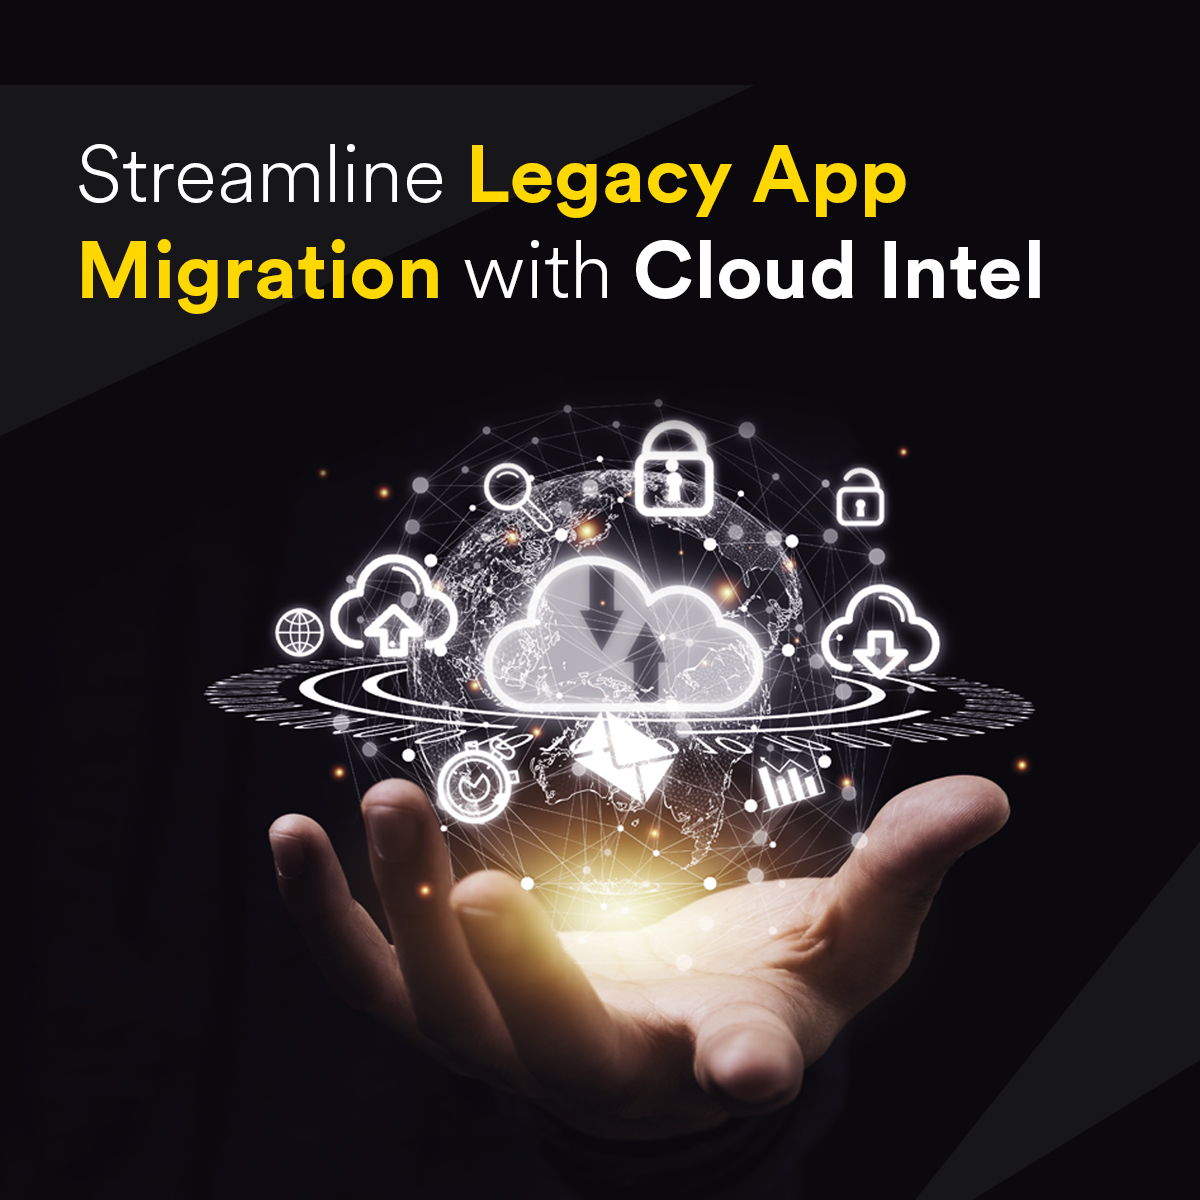 click2cloud blogs- Streamline Legacy App Migration to the Cloud with Cloud Intel